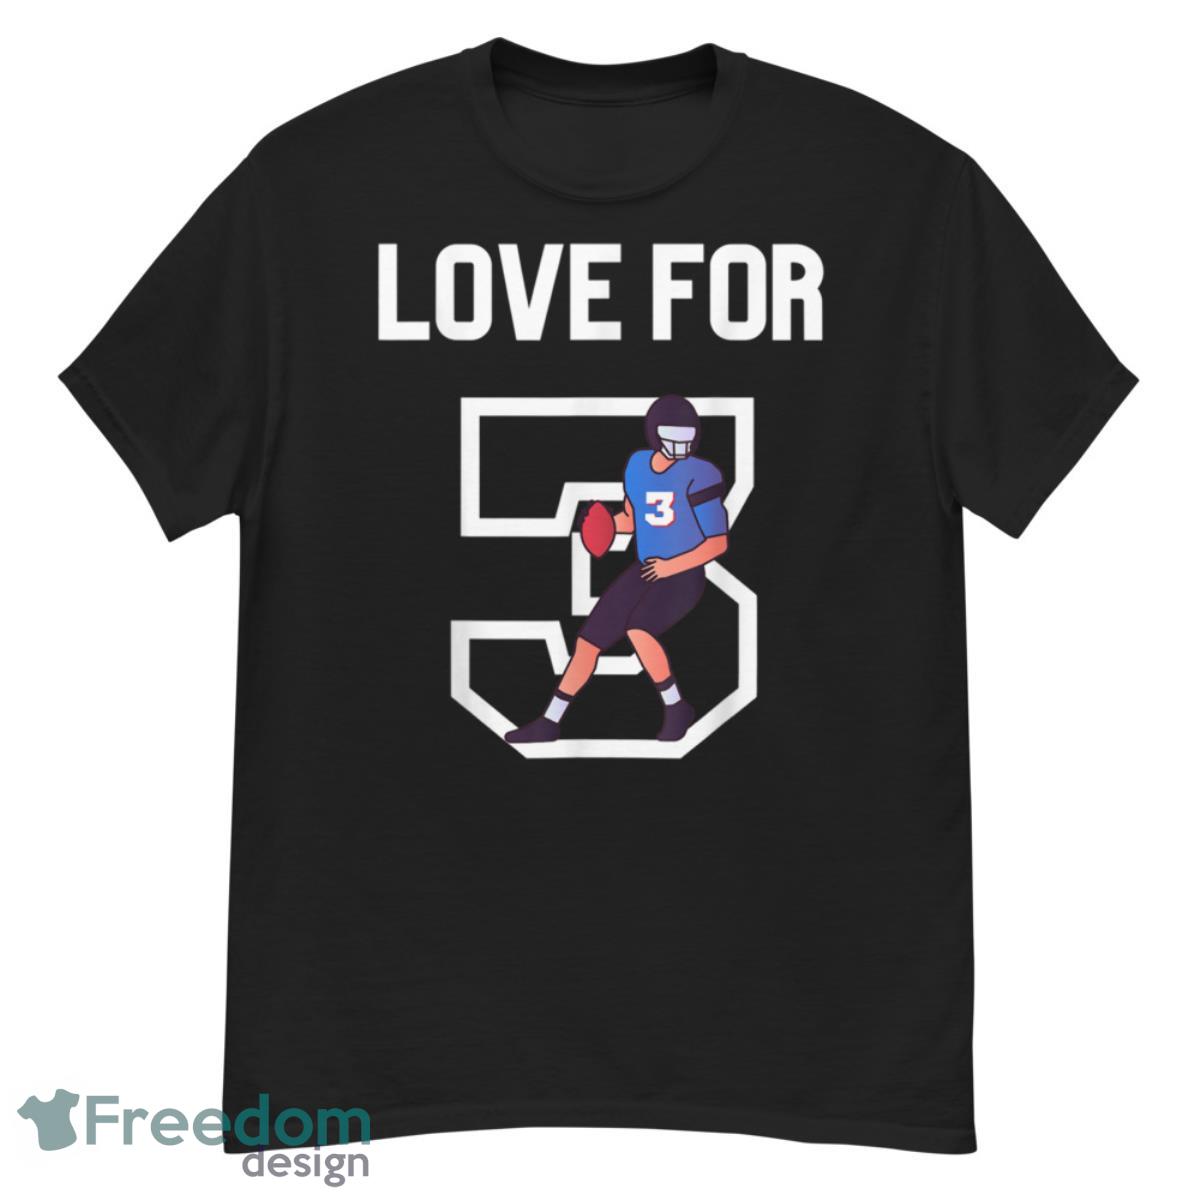 We Are With You Damar Love For 3 T Shirt - G500 Men’s Classic T-Shirt